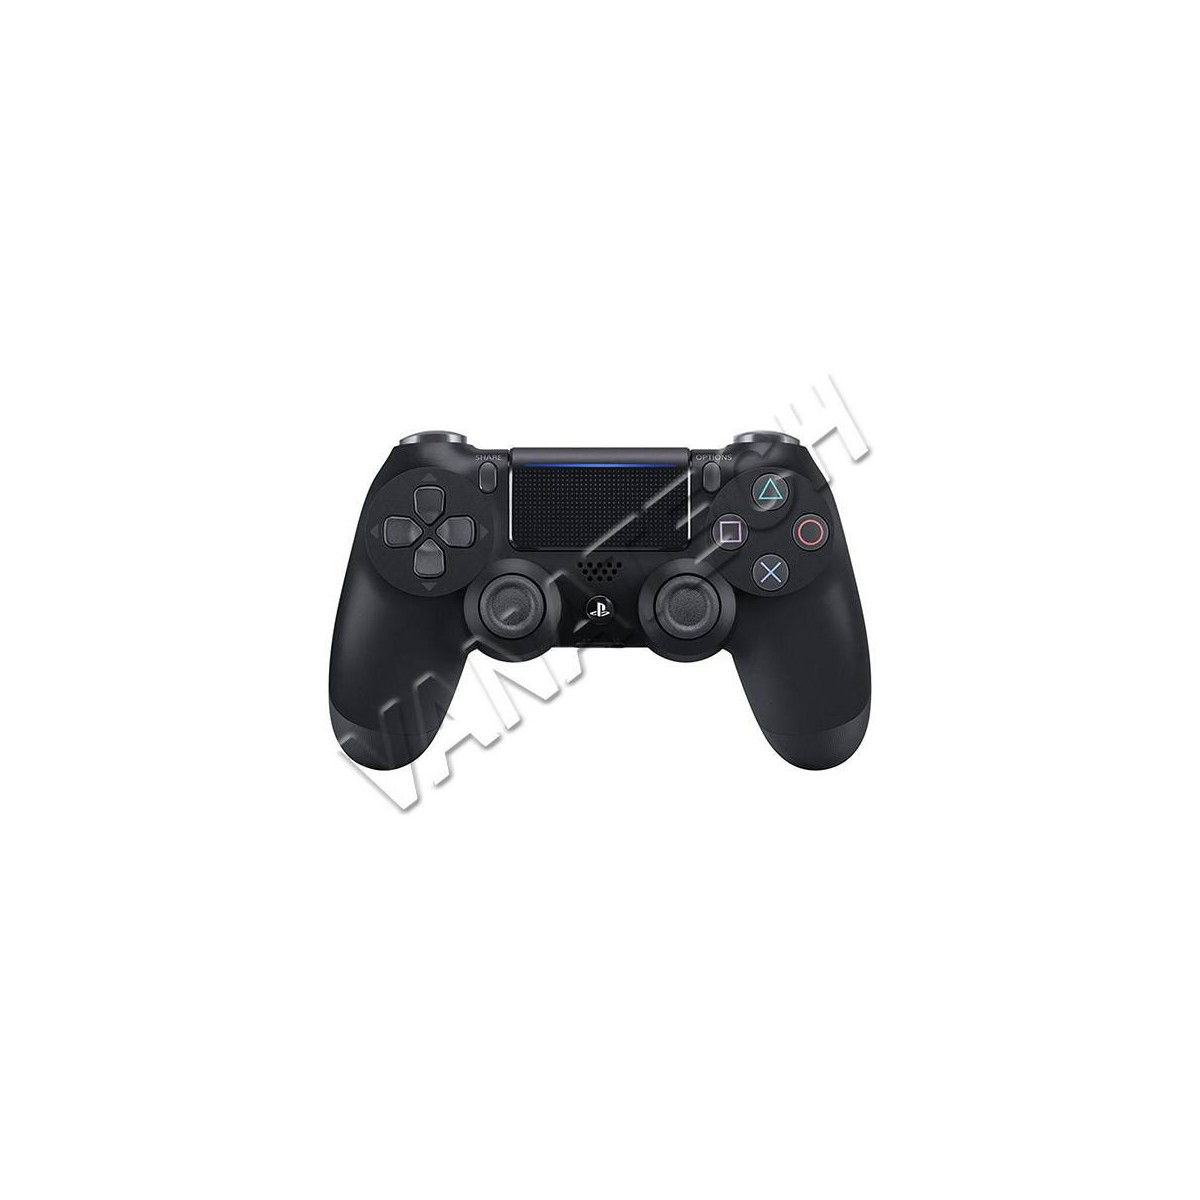 CONTROLLER SONY WIRELESS PS4 DUALSHOCK 4 PAD PLAYSTATION 4 V2